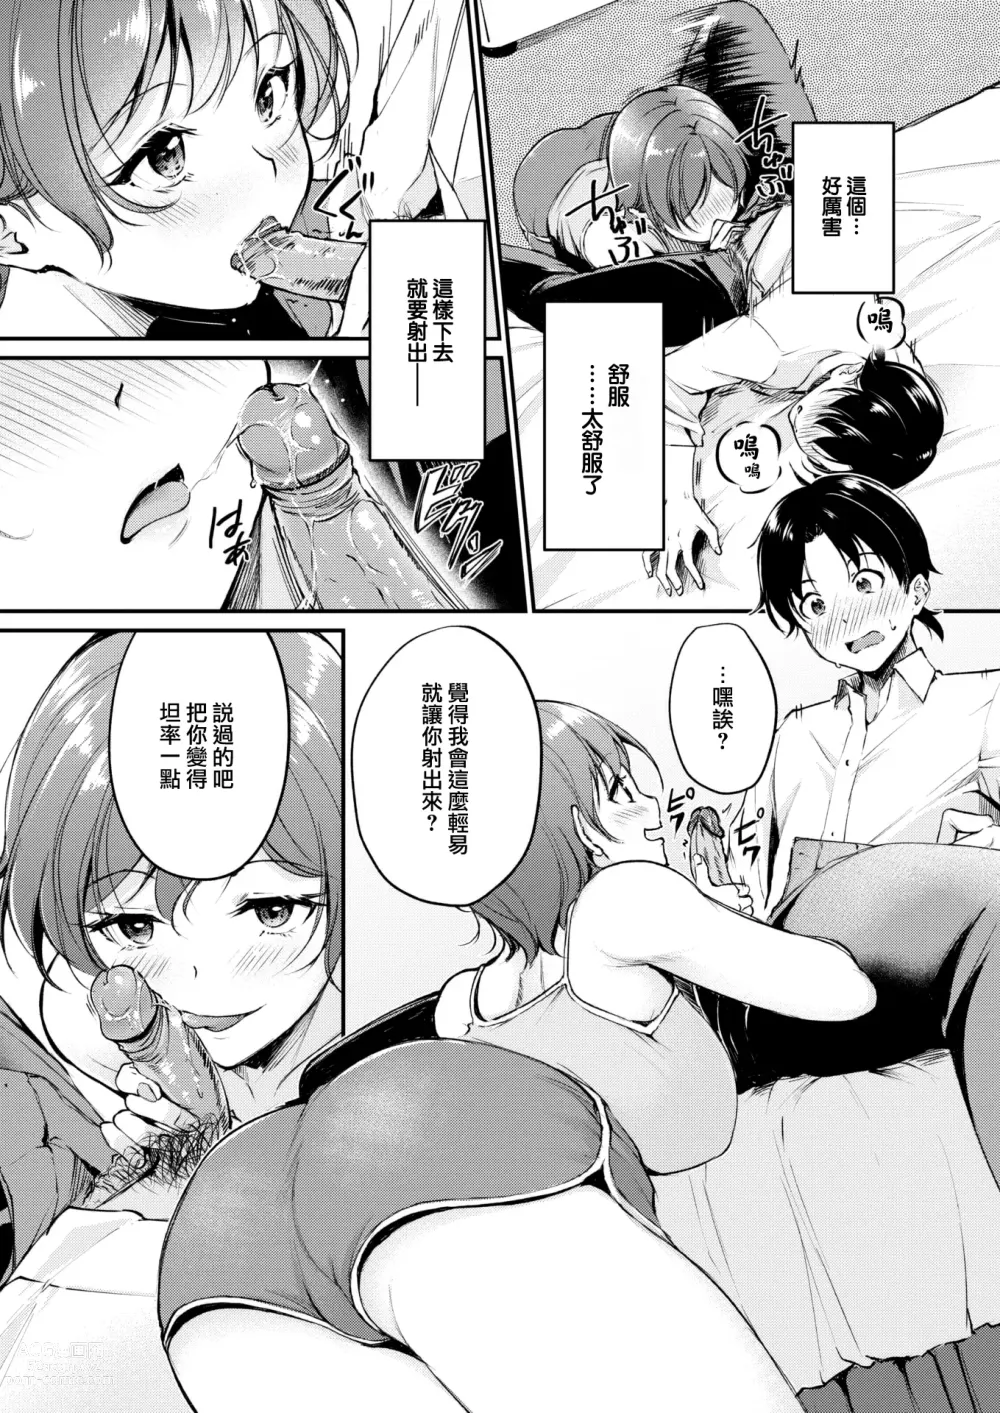 Page 12 of doujinshi えっちは謎解きのあとで